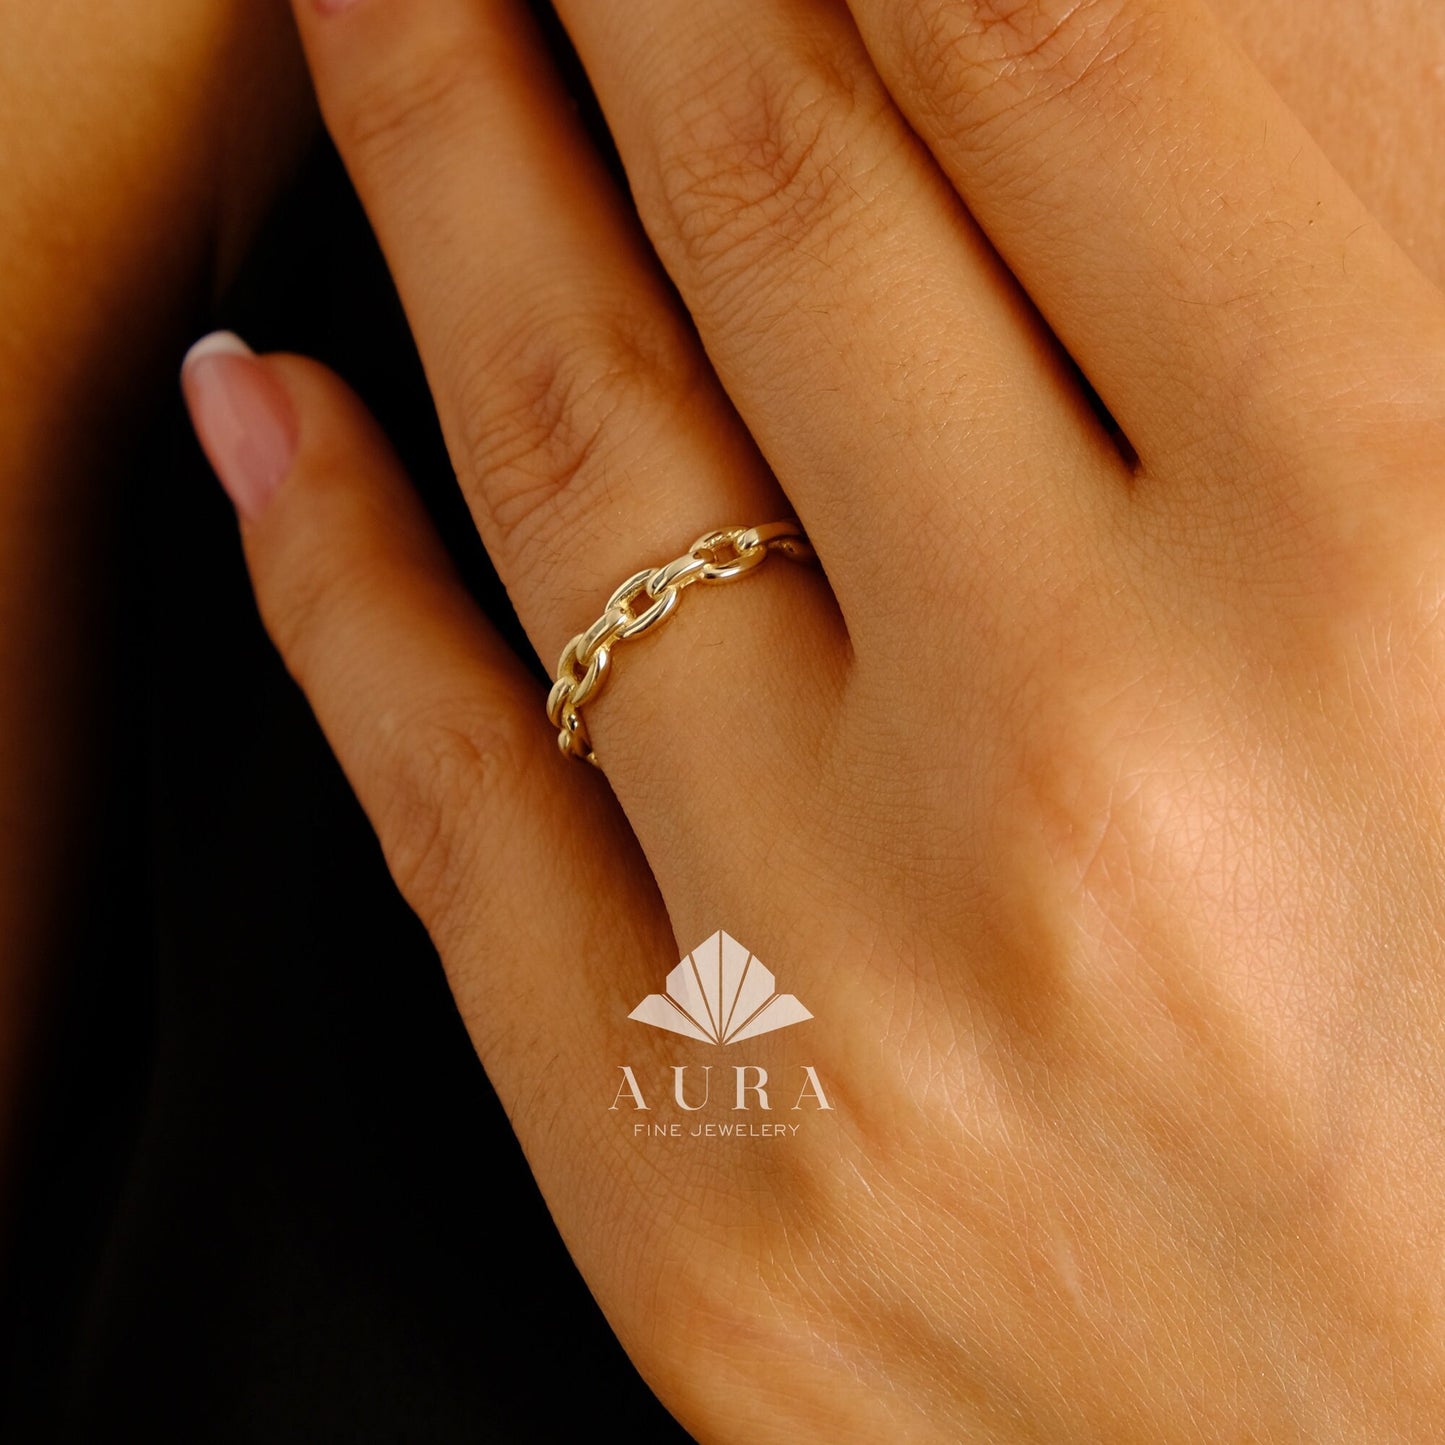 14K Gold Chain Ring, Dainty Gold Band, Paperclip Chain Ring, Curb Chain Link Ring, Wedding Band, Simple Stacking Ring, Pointer Finger Ring